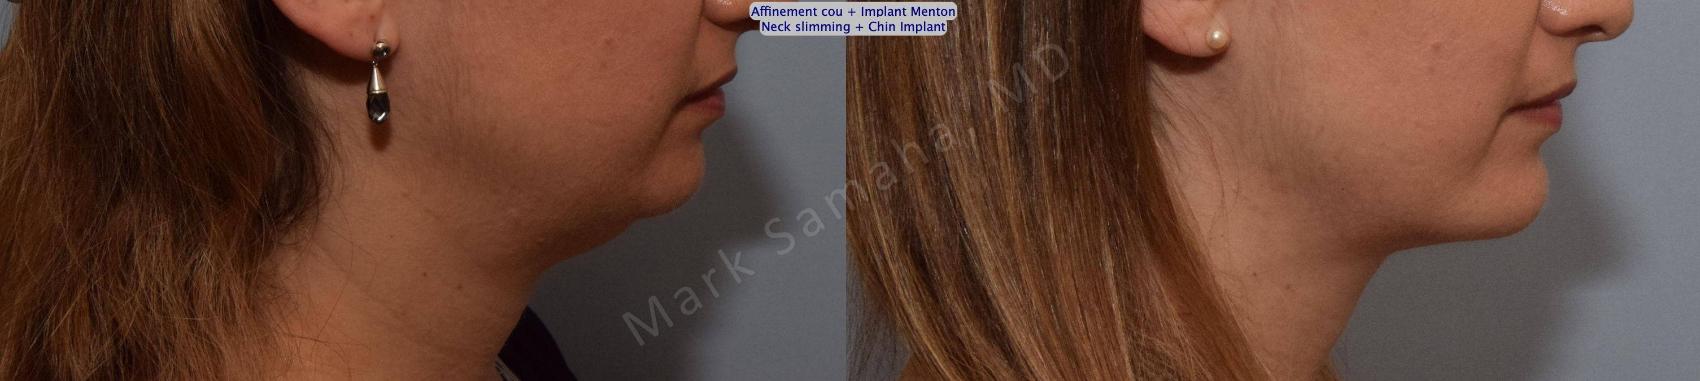 Before & After Chirurgie d’affinement du visage / Face Slimming Surgery Case 161 Right Side View in Montreal, QC